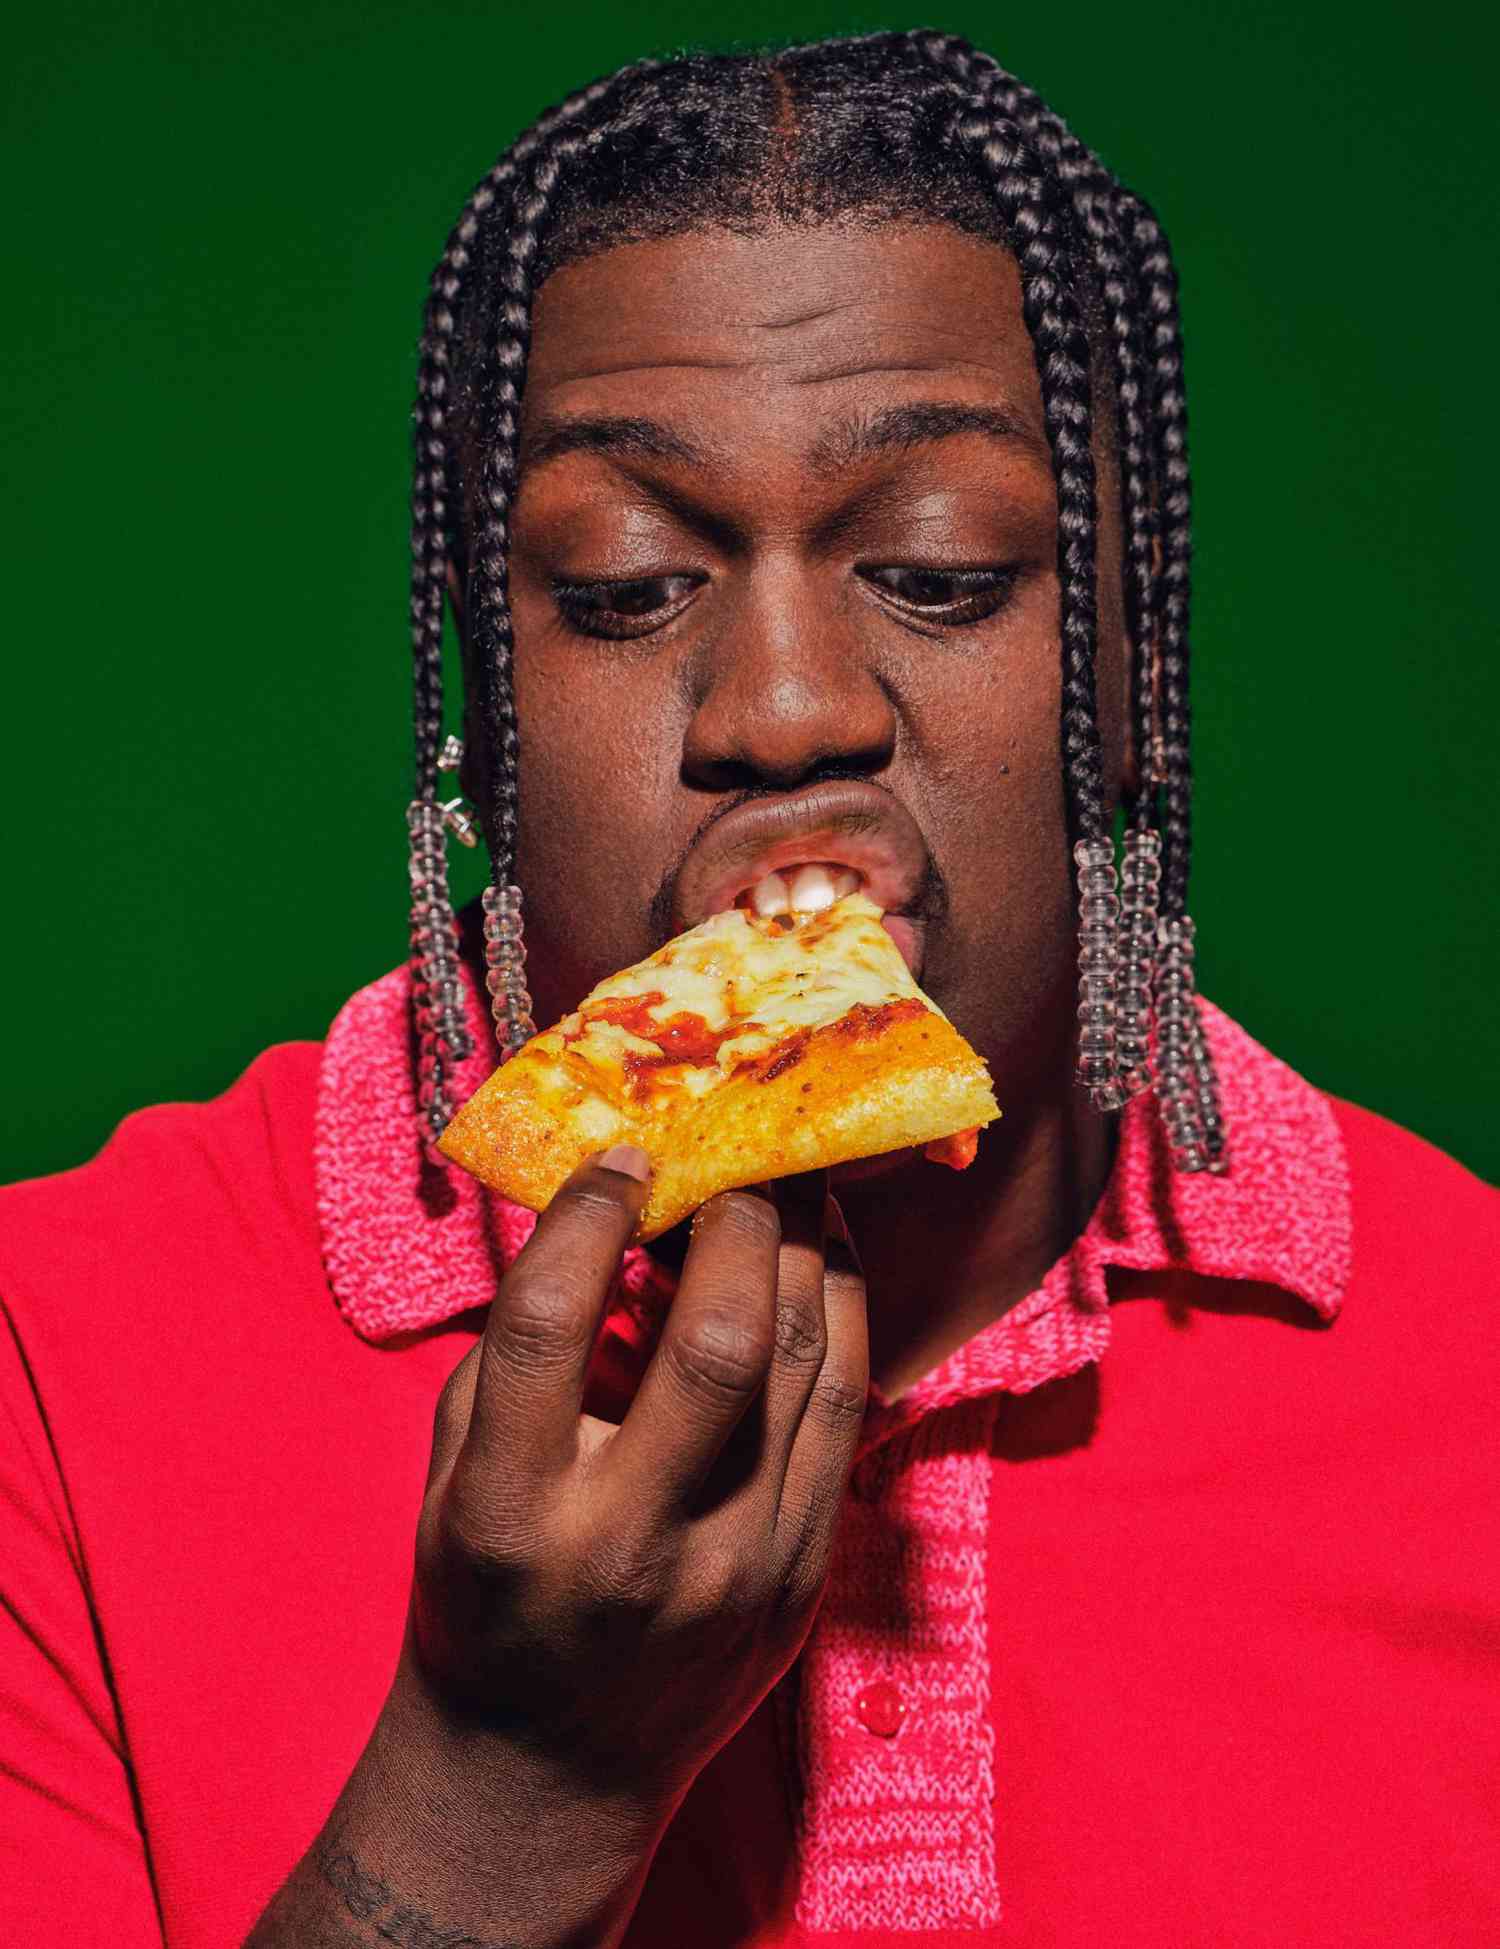 Credit: Courtesy Deep Cuts Headline: Lil Yachty's New Frozen Pizza Brand Won't Include 'Disgusting' Broccoli: 'I Don't Eat Vegetables'